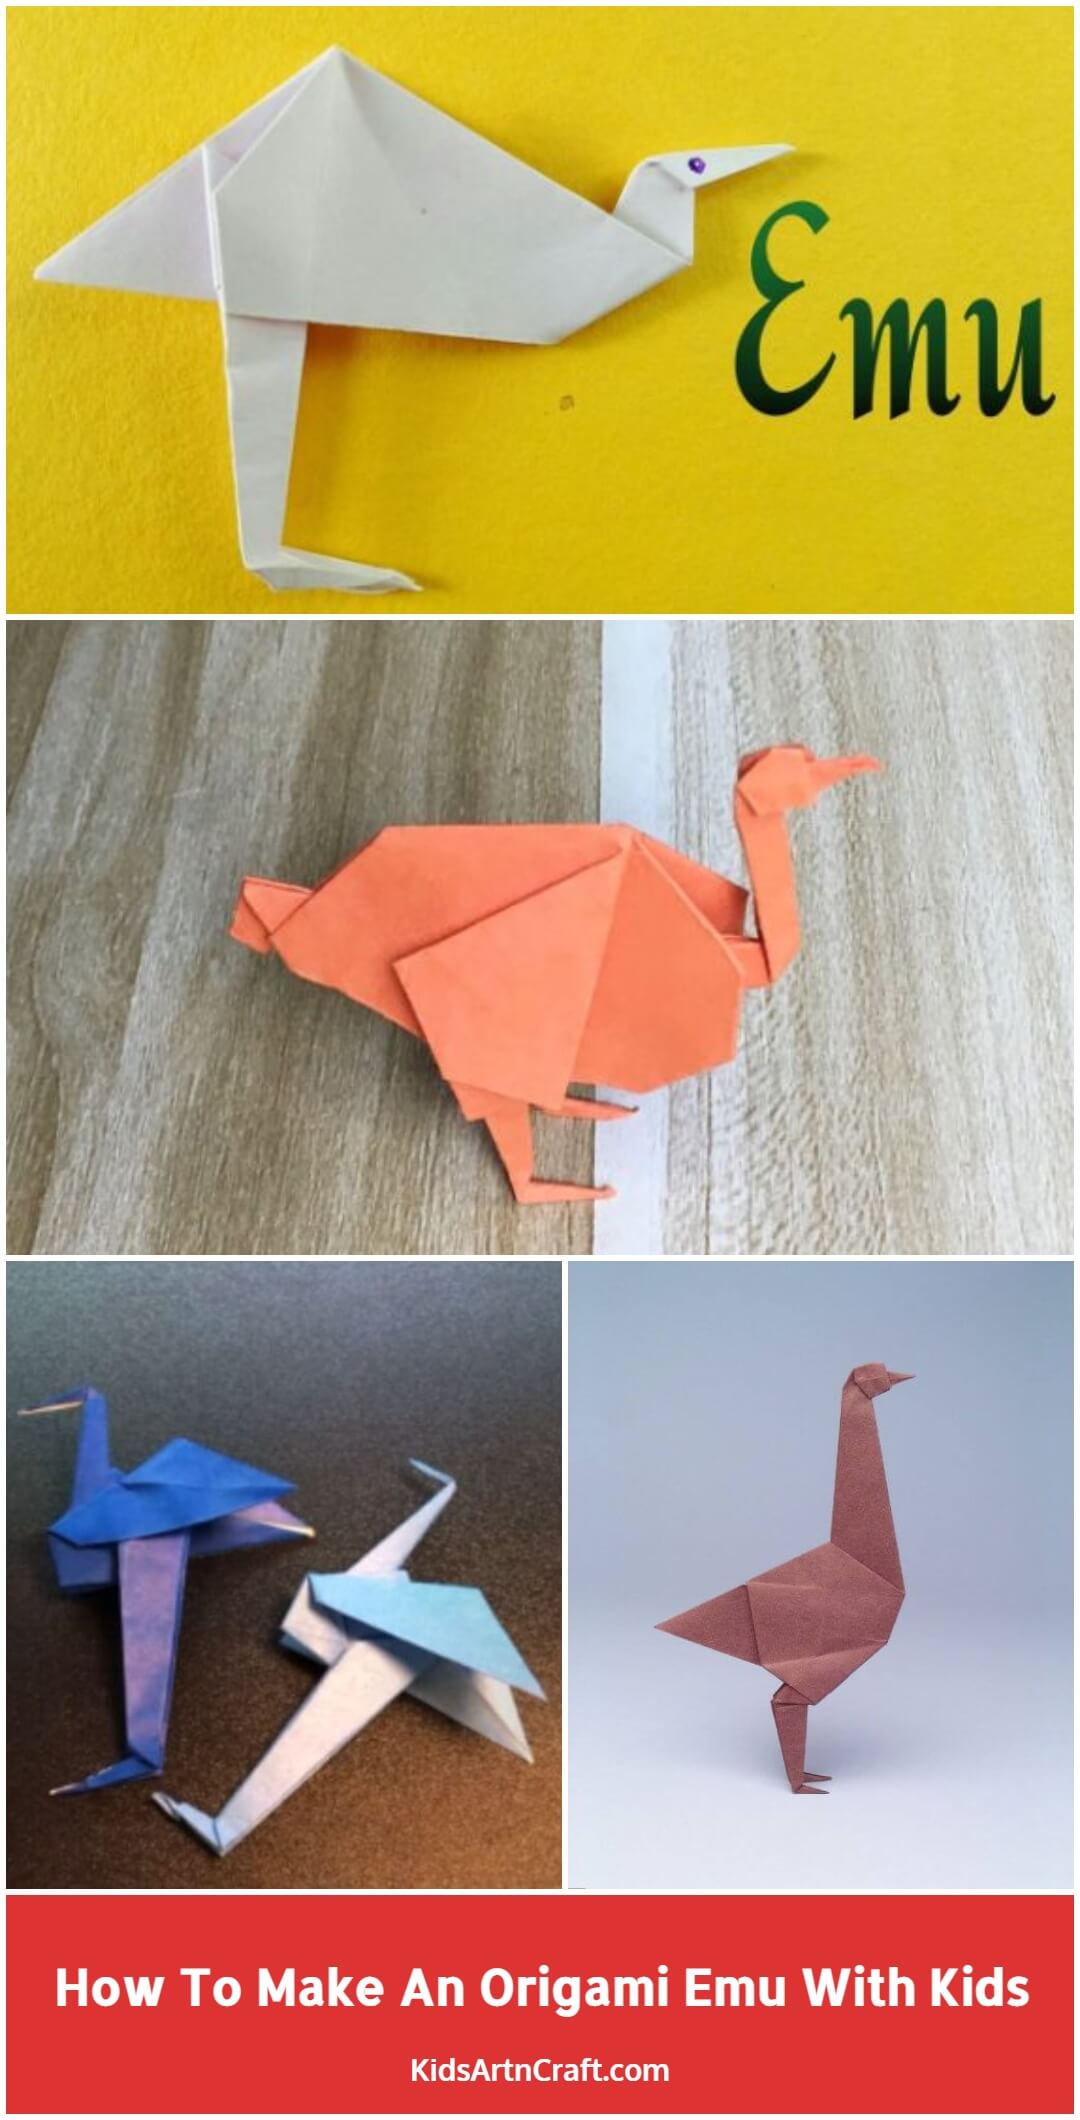 How To Make An Origami Emu With Kids